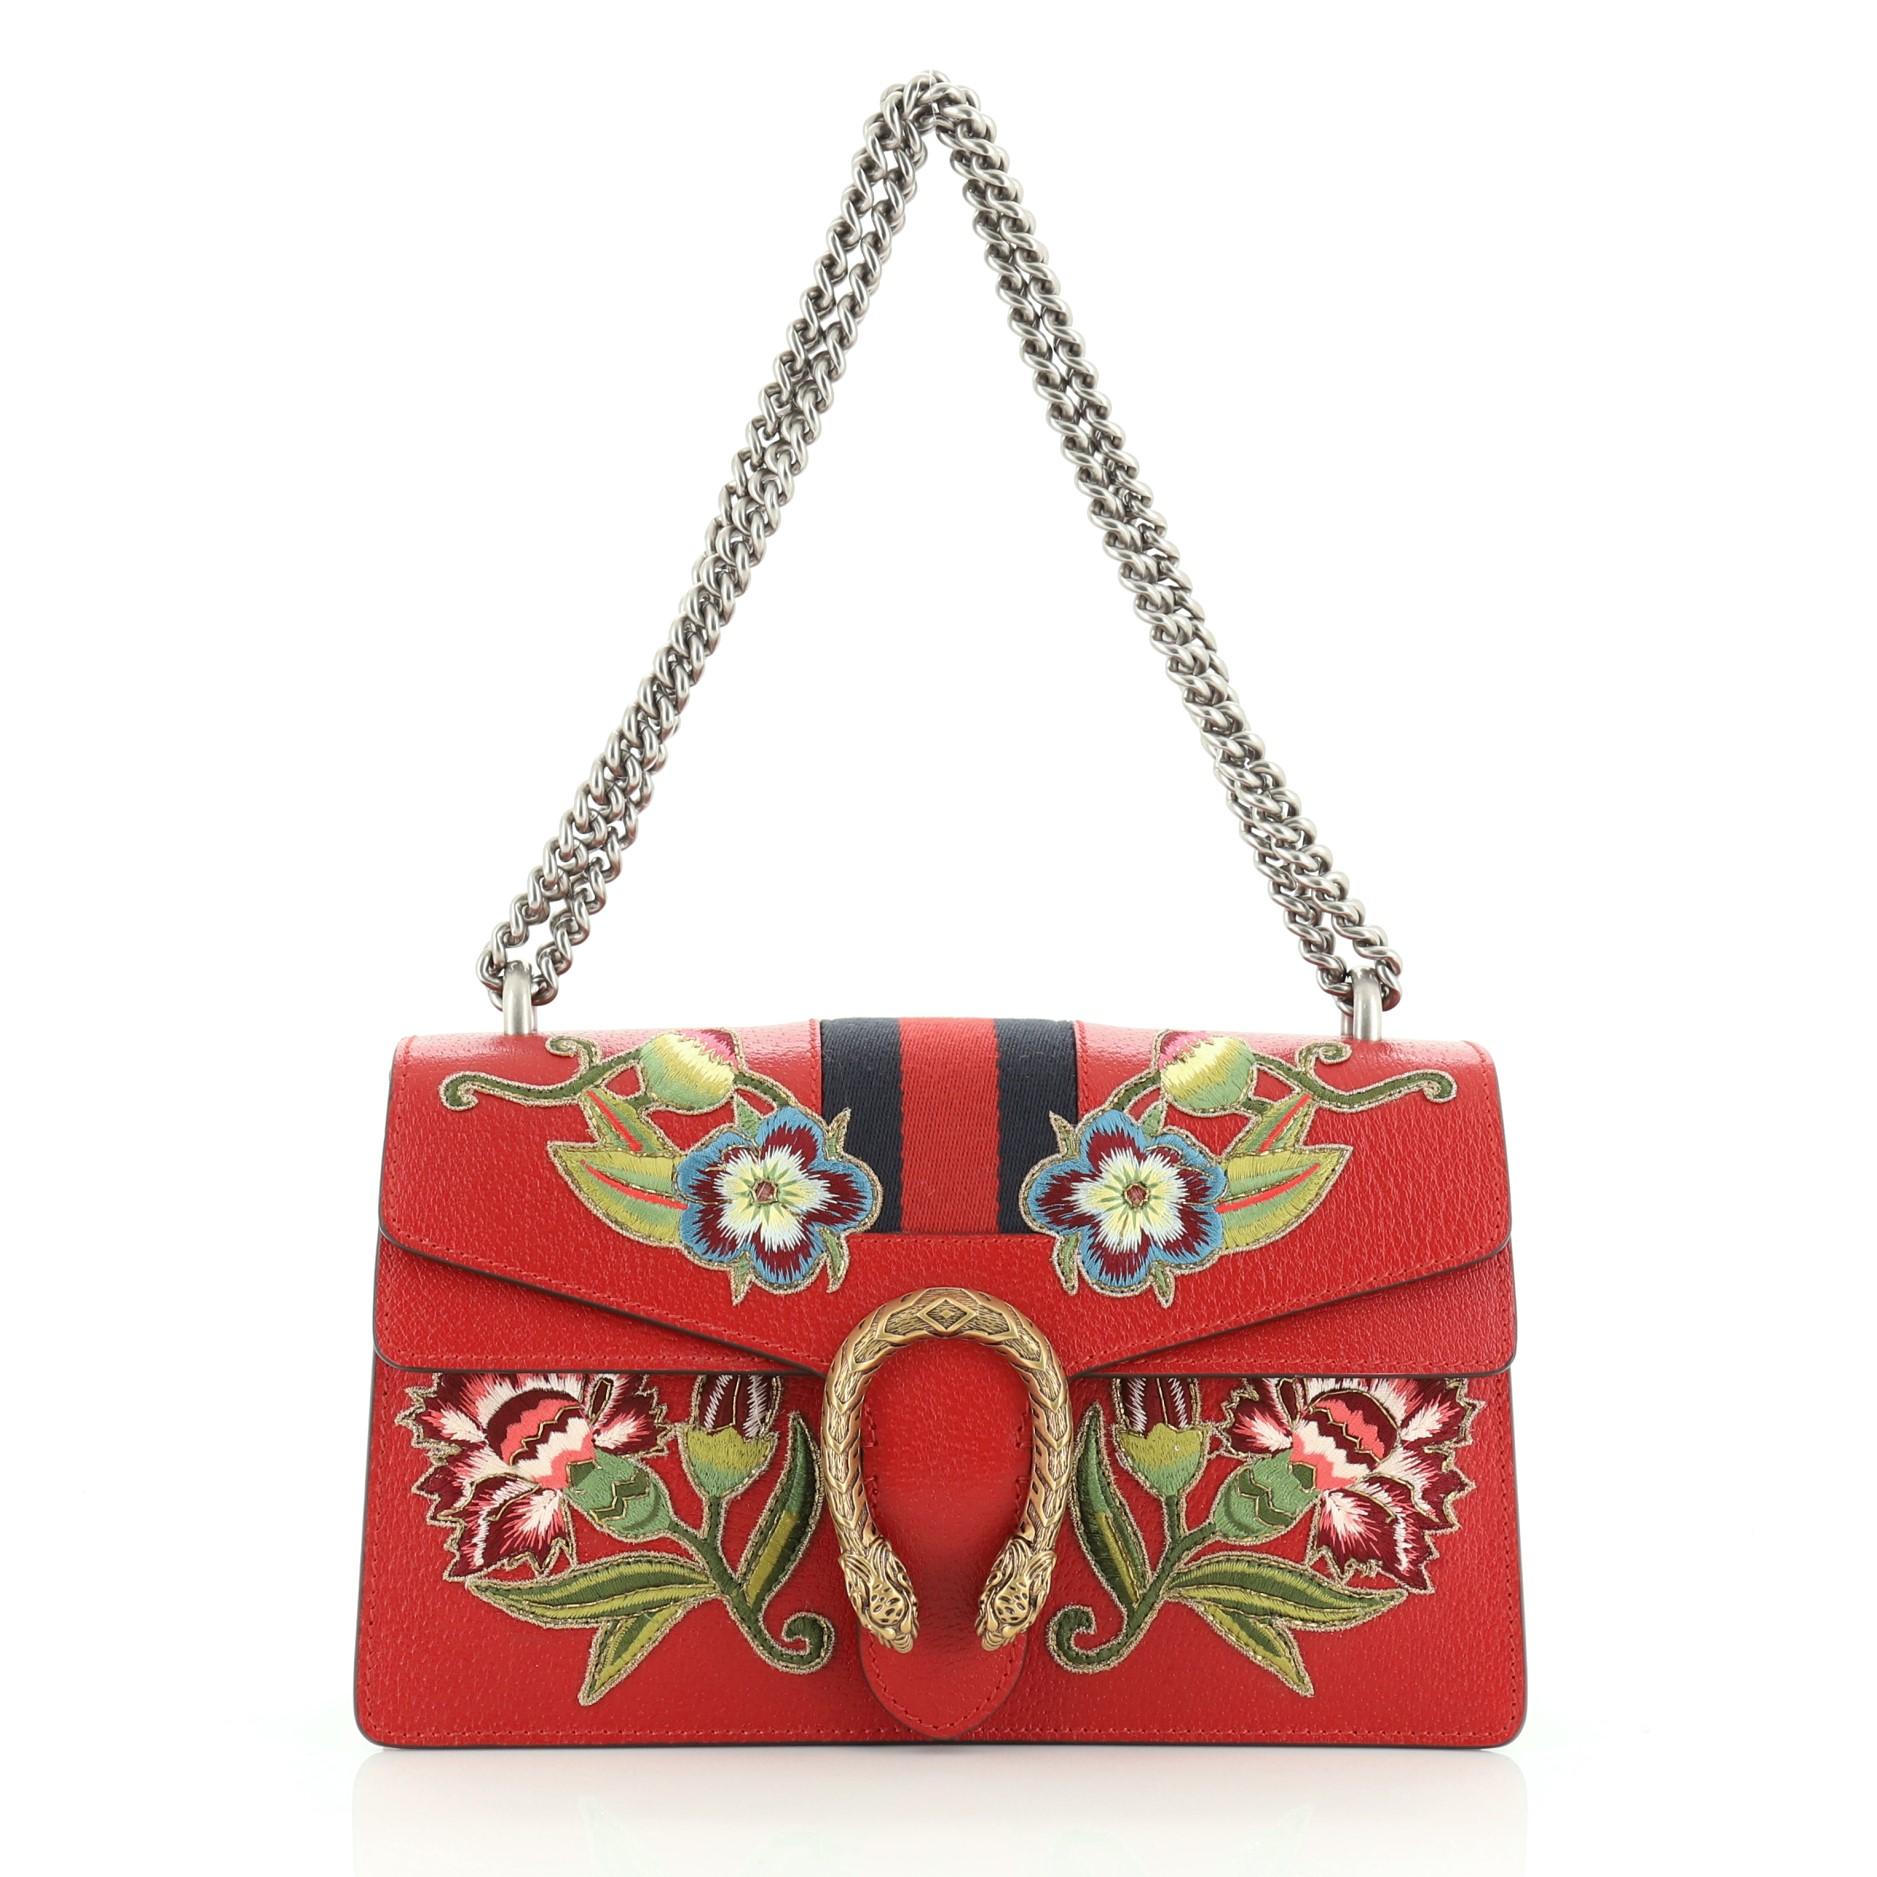 This Gucci Web Dionysus Bag Embroidered Leather Small, crafted from red leather, features chain link strap, textured tiger head spur detail on its flap, floral embroidery, and aged gold and aged silver-tone hardware. Its hidden push-pin closure